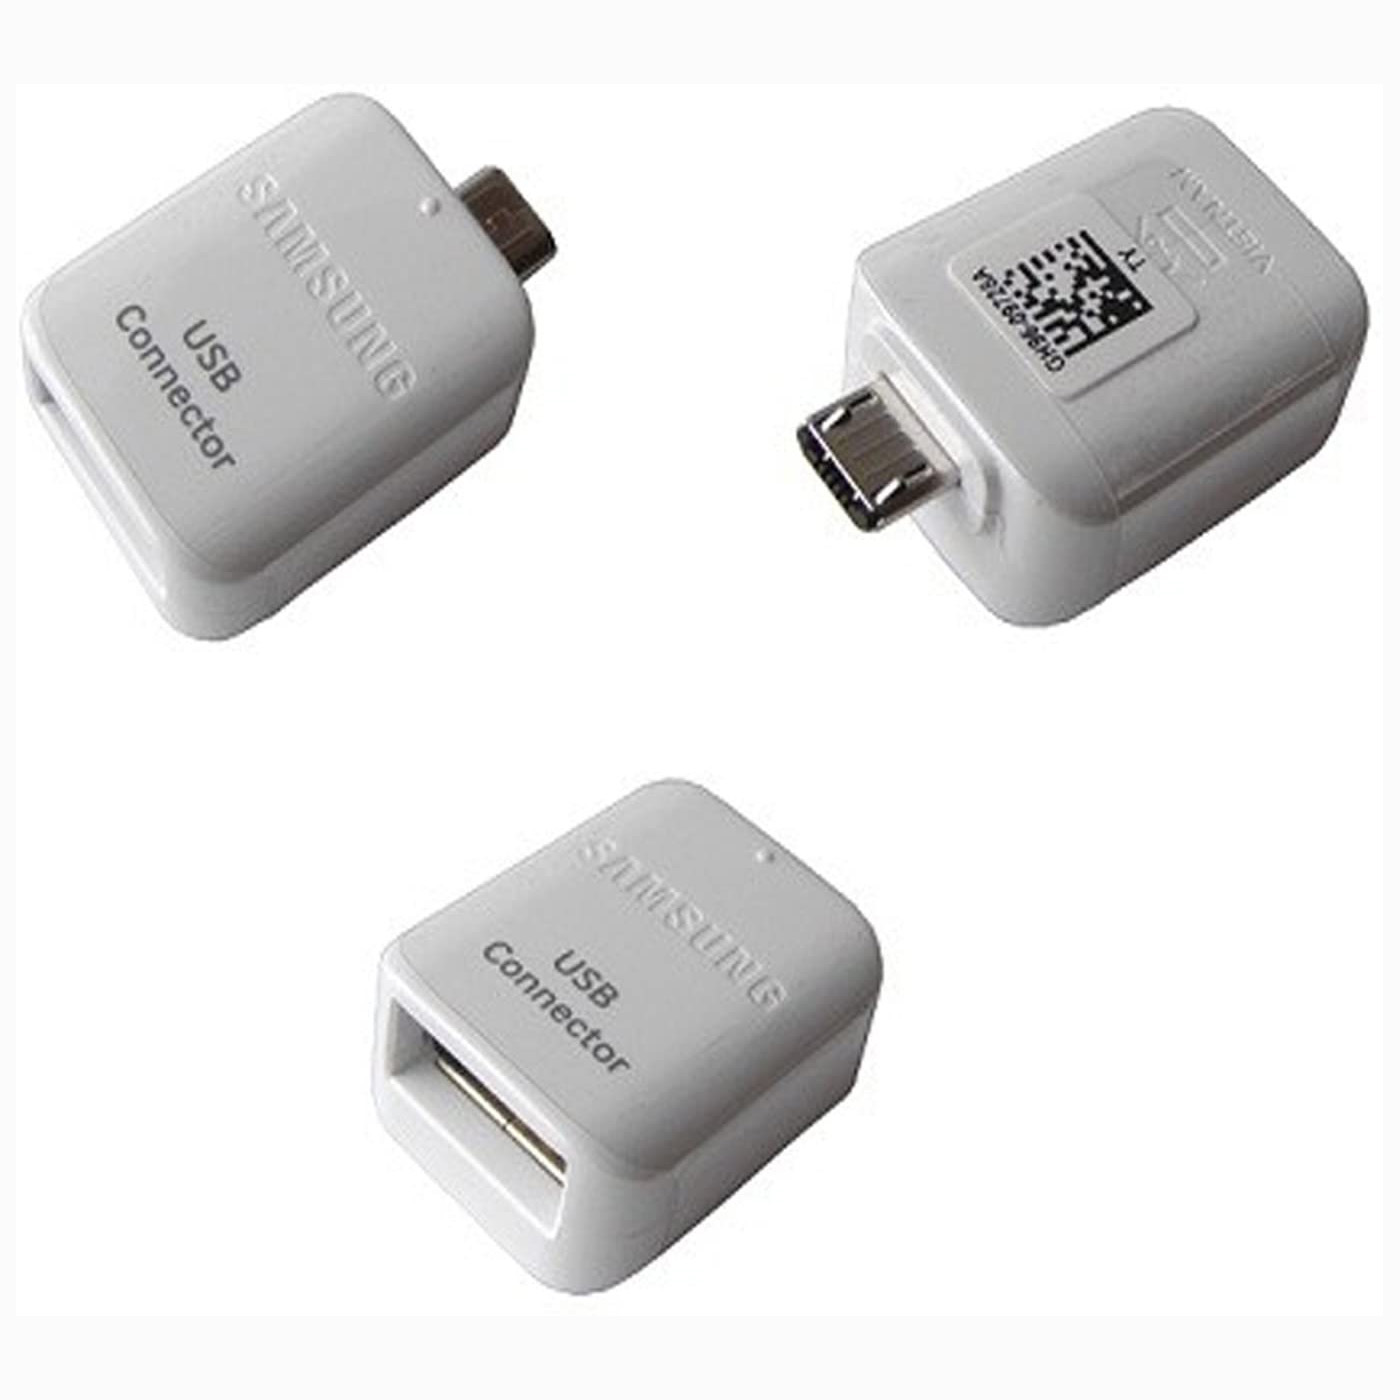 MINI OTG ADAPTER MICRO FOR TABLET PC & MOBILE جوده عاليه, Cable